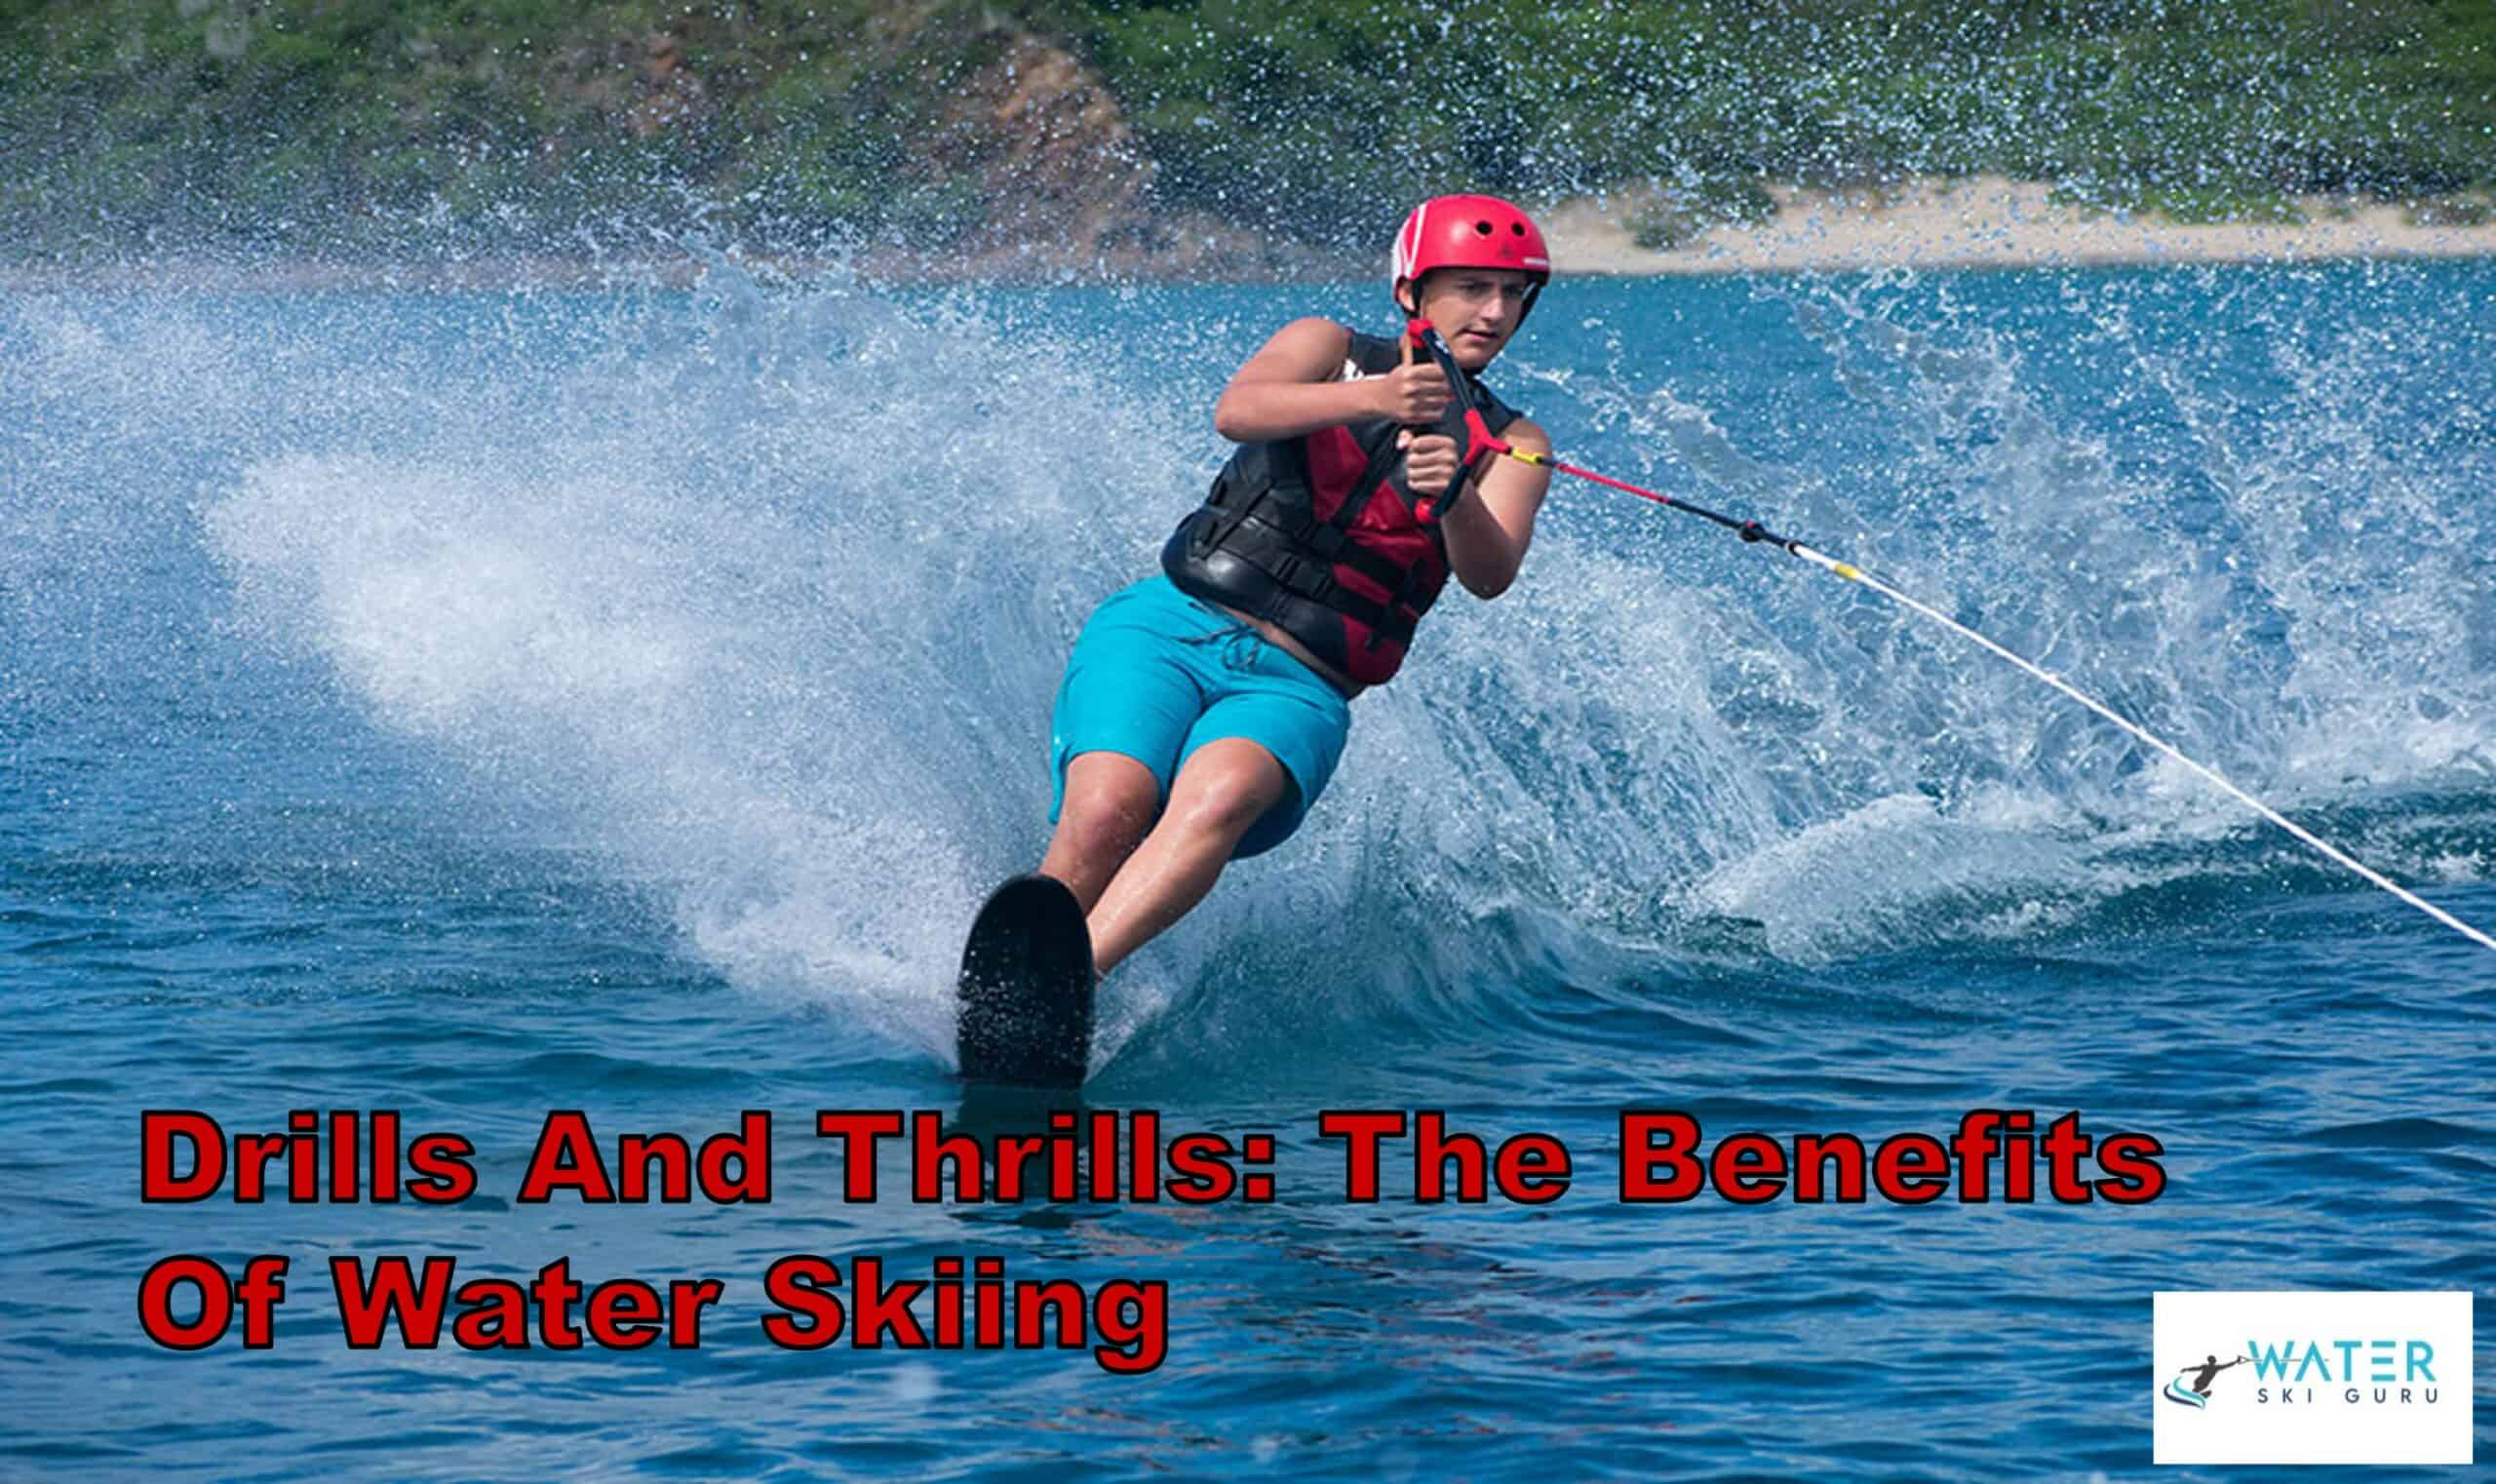 Drills And Thrills: The Benefits of Water Skiing